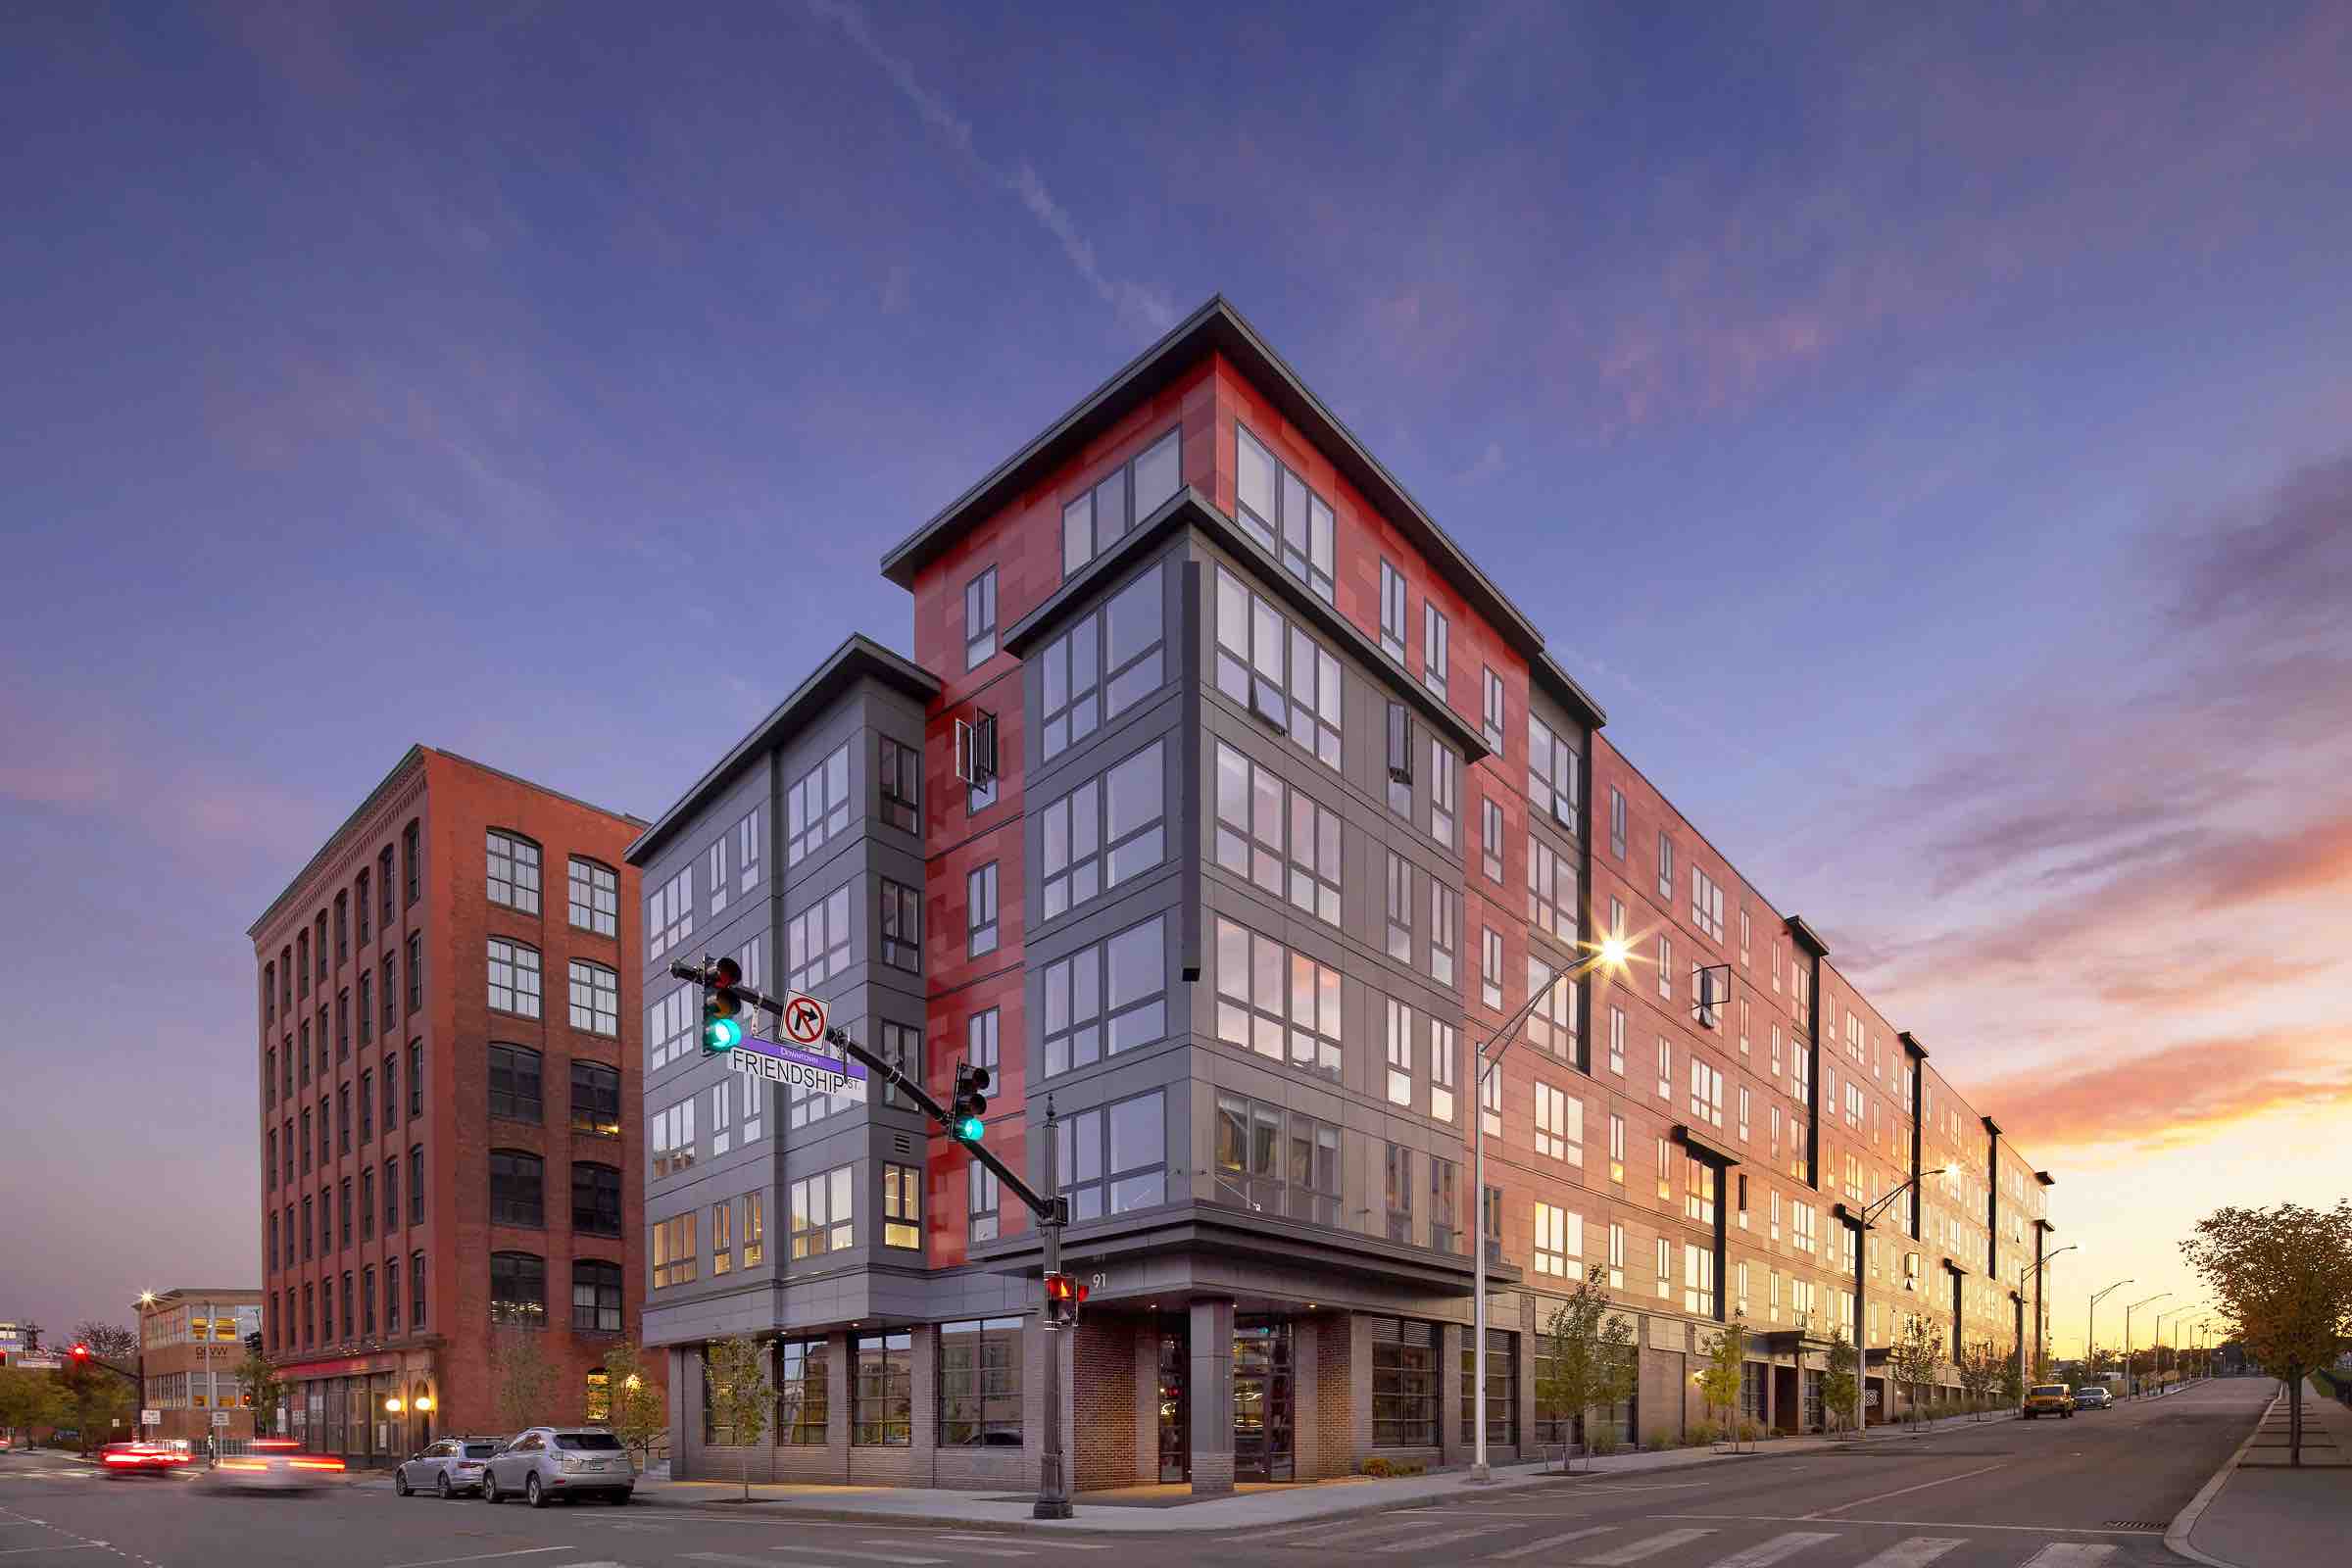 In Providence, Rhode Island, TAT's Chestnut Commons creates new housing on the site of a former highway, showing how cities can find value in a wide range of building sites (Photo Credit: Bruce Martin